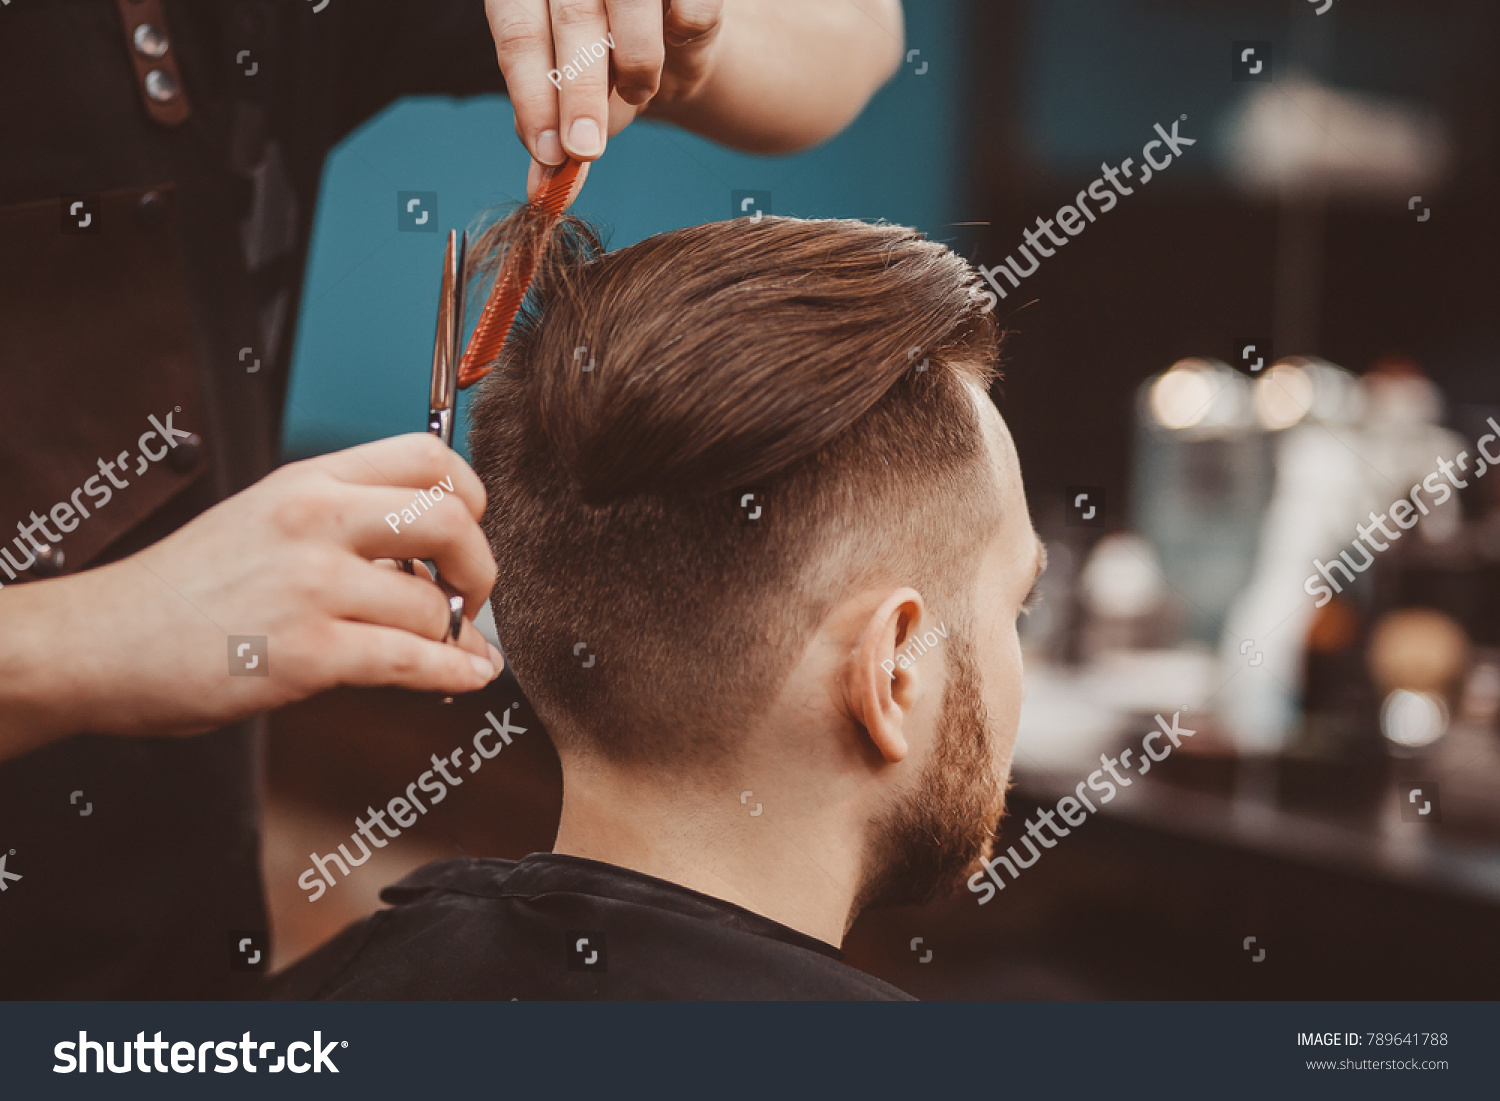 Close-up, master hairdresser does hairstyle and style with scissors and comb. Concept Barbershop. #789641788